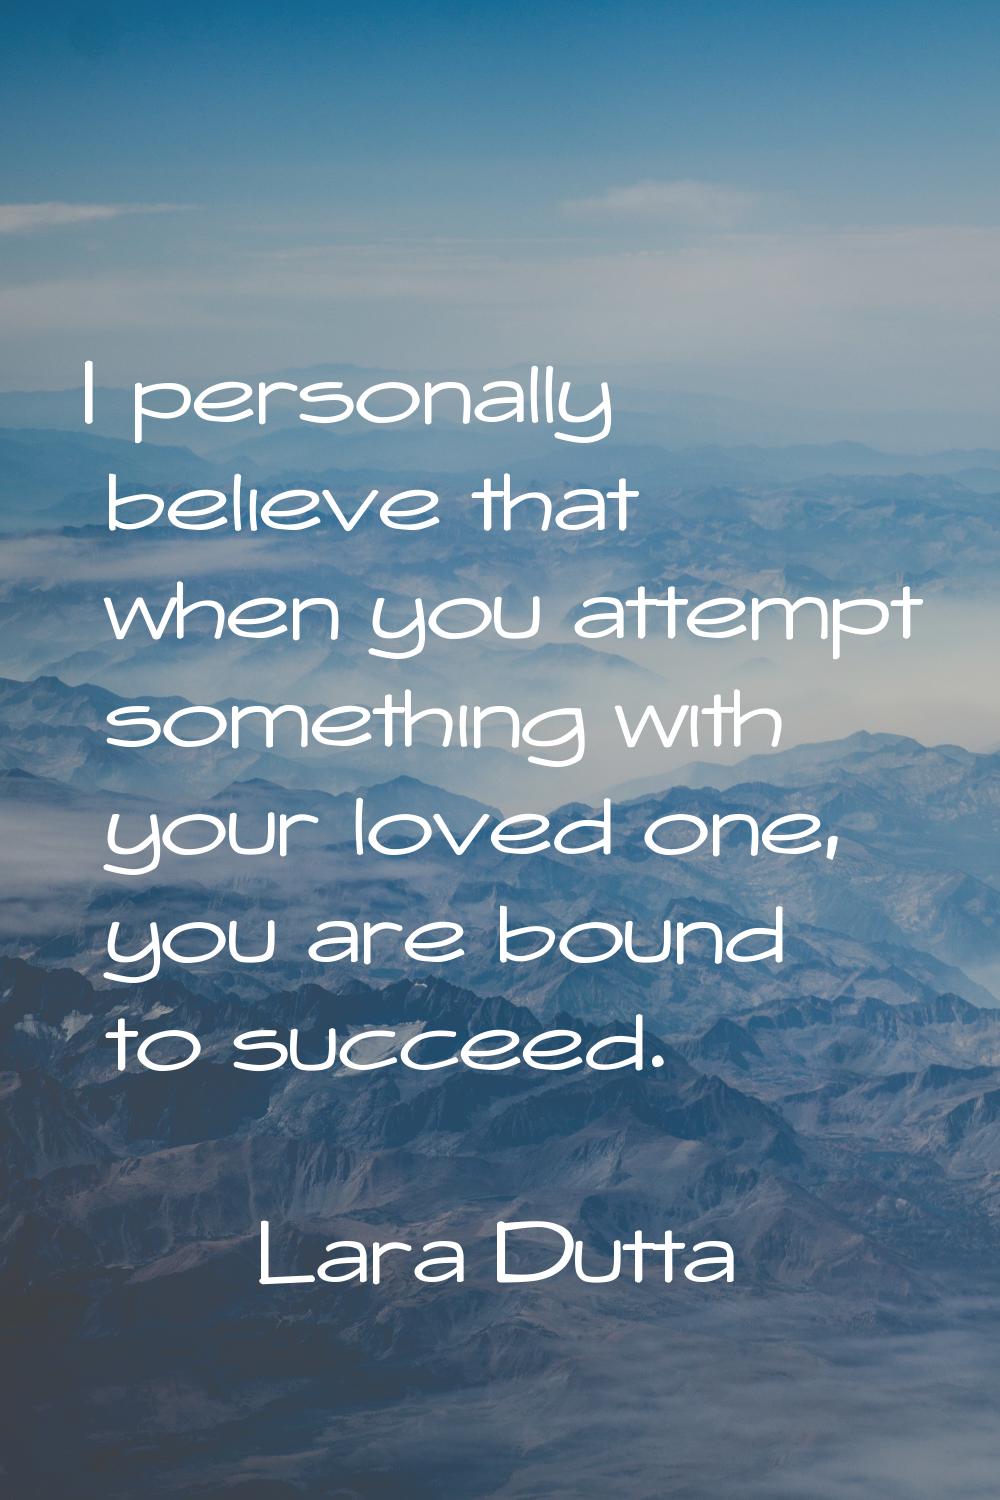 I personally believe that when you attempt something with your loved one, you are bound to succeed.